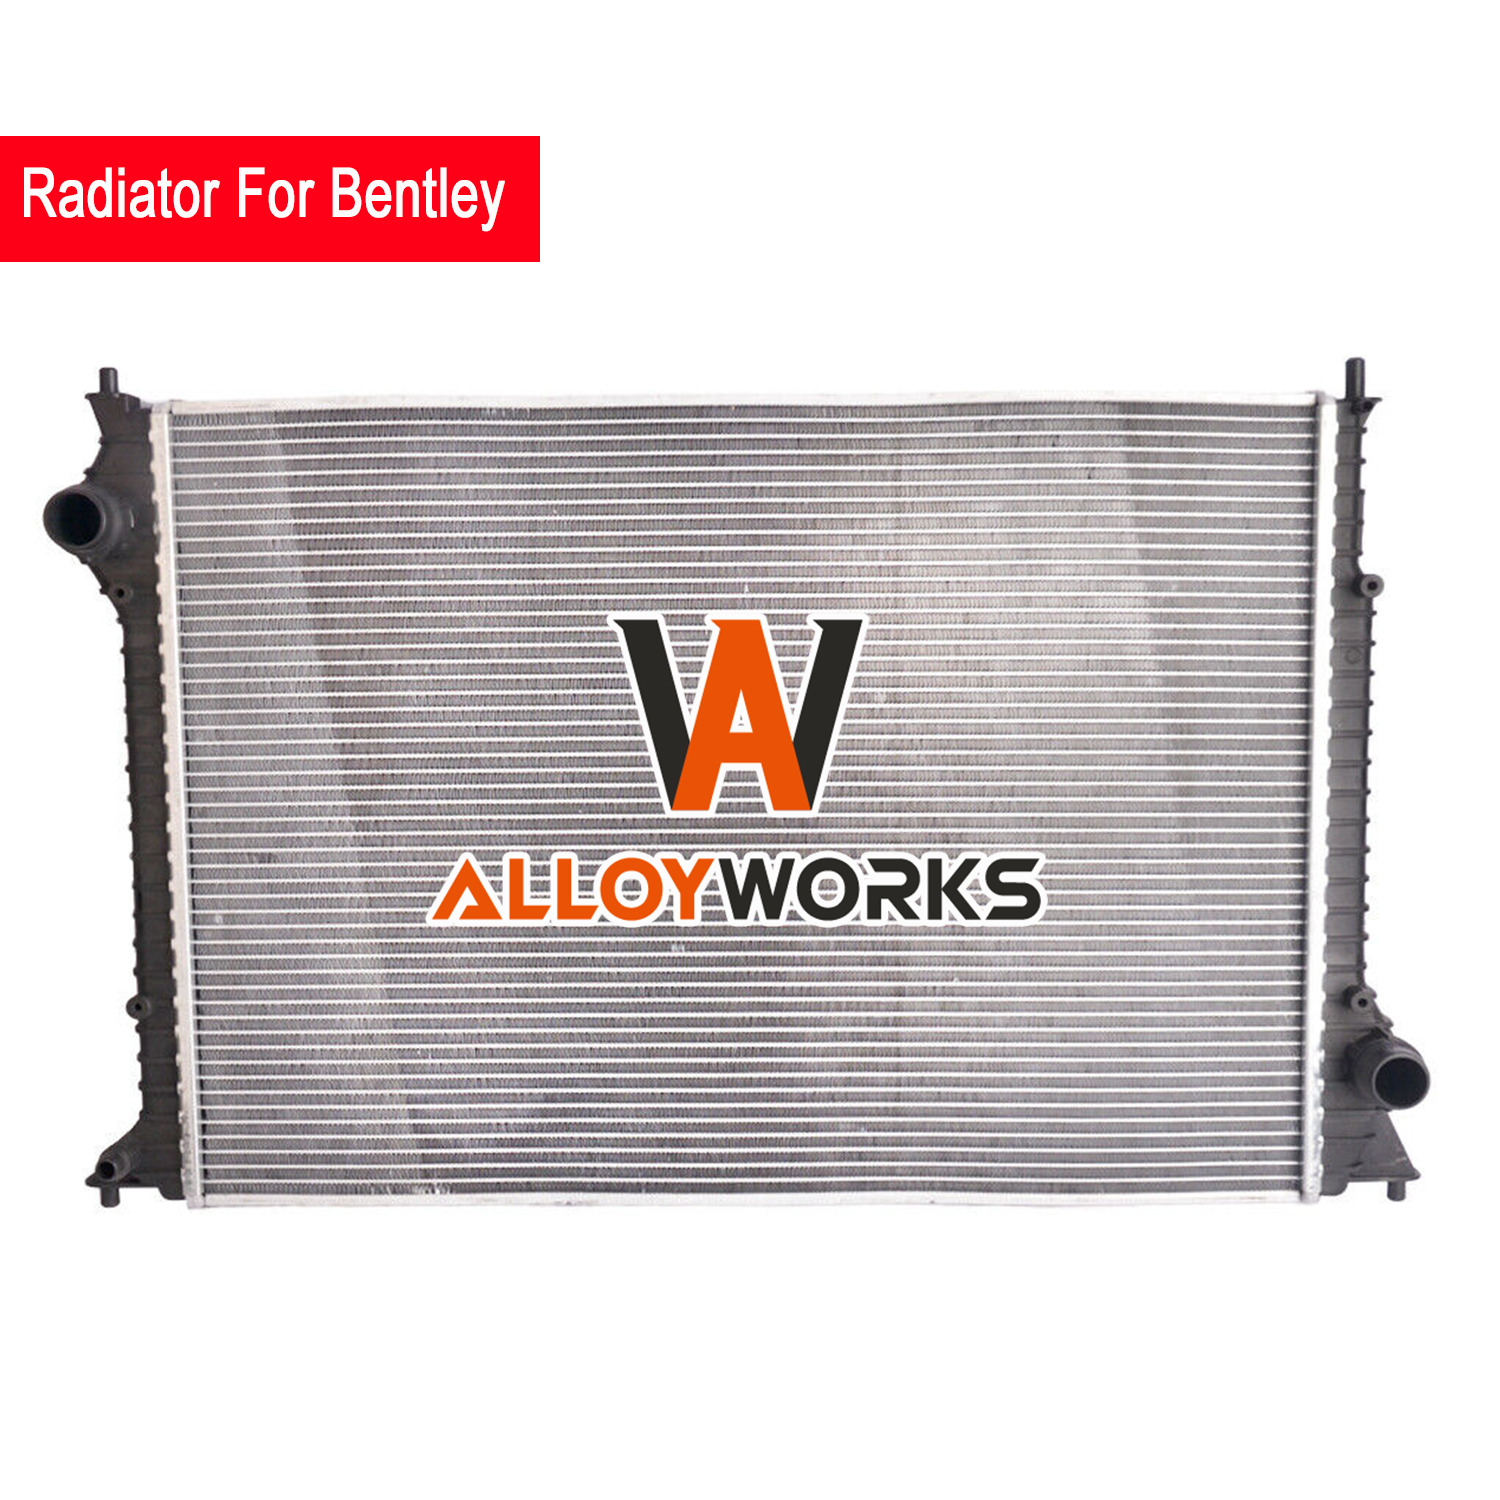 2 Row Coolant Radiator For 2004-2011 Bentley Continental GT GTC Flying Spur